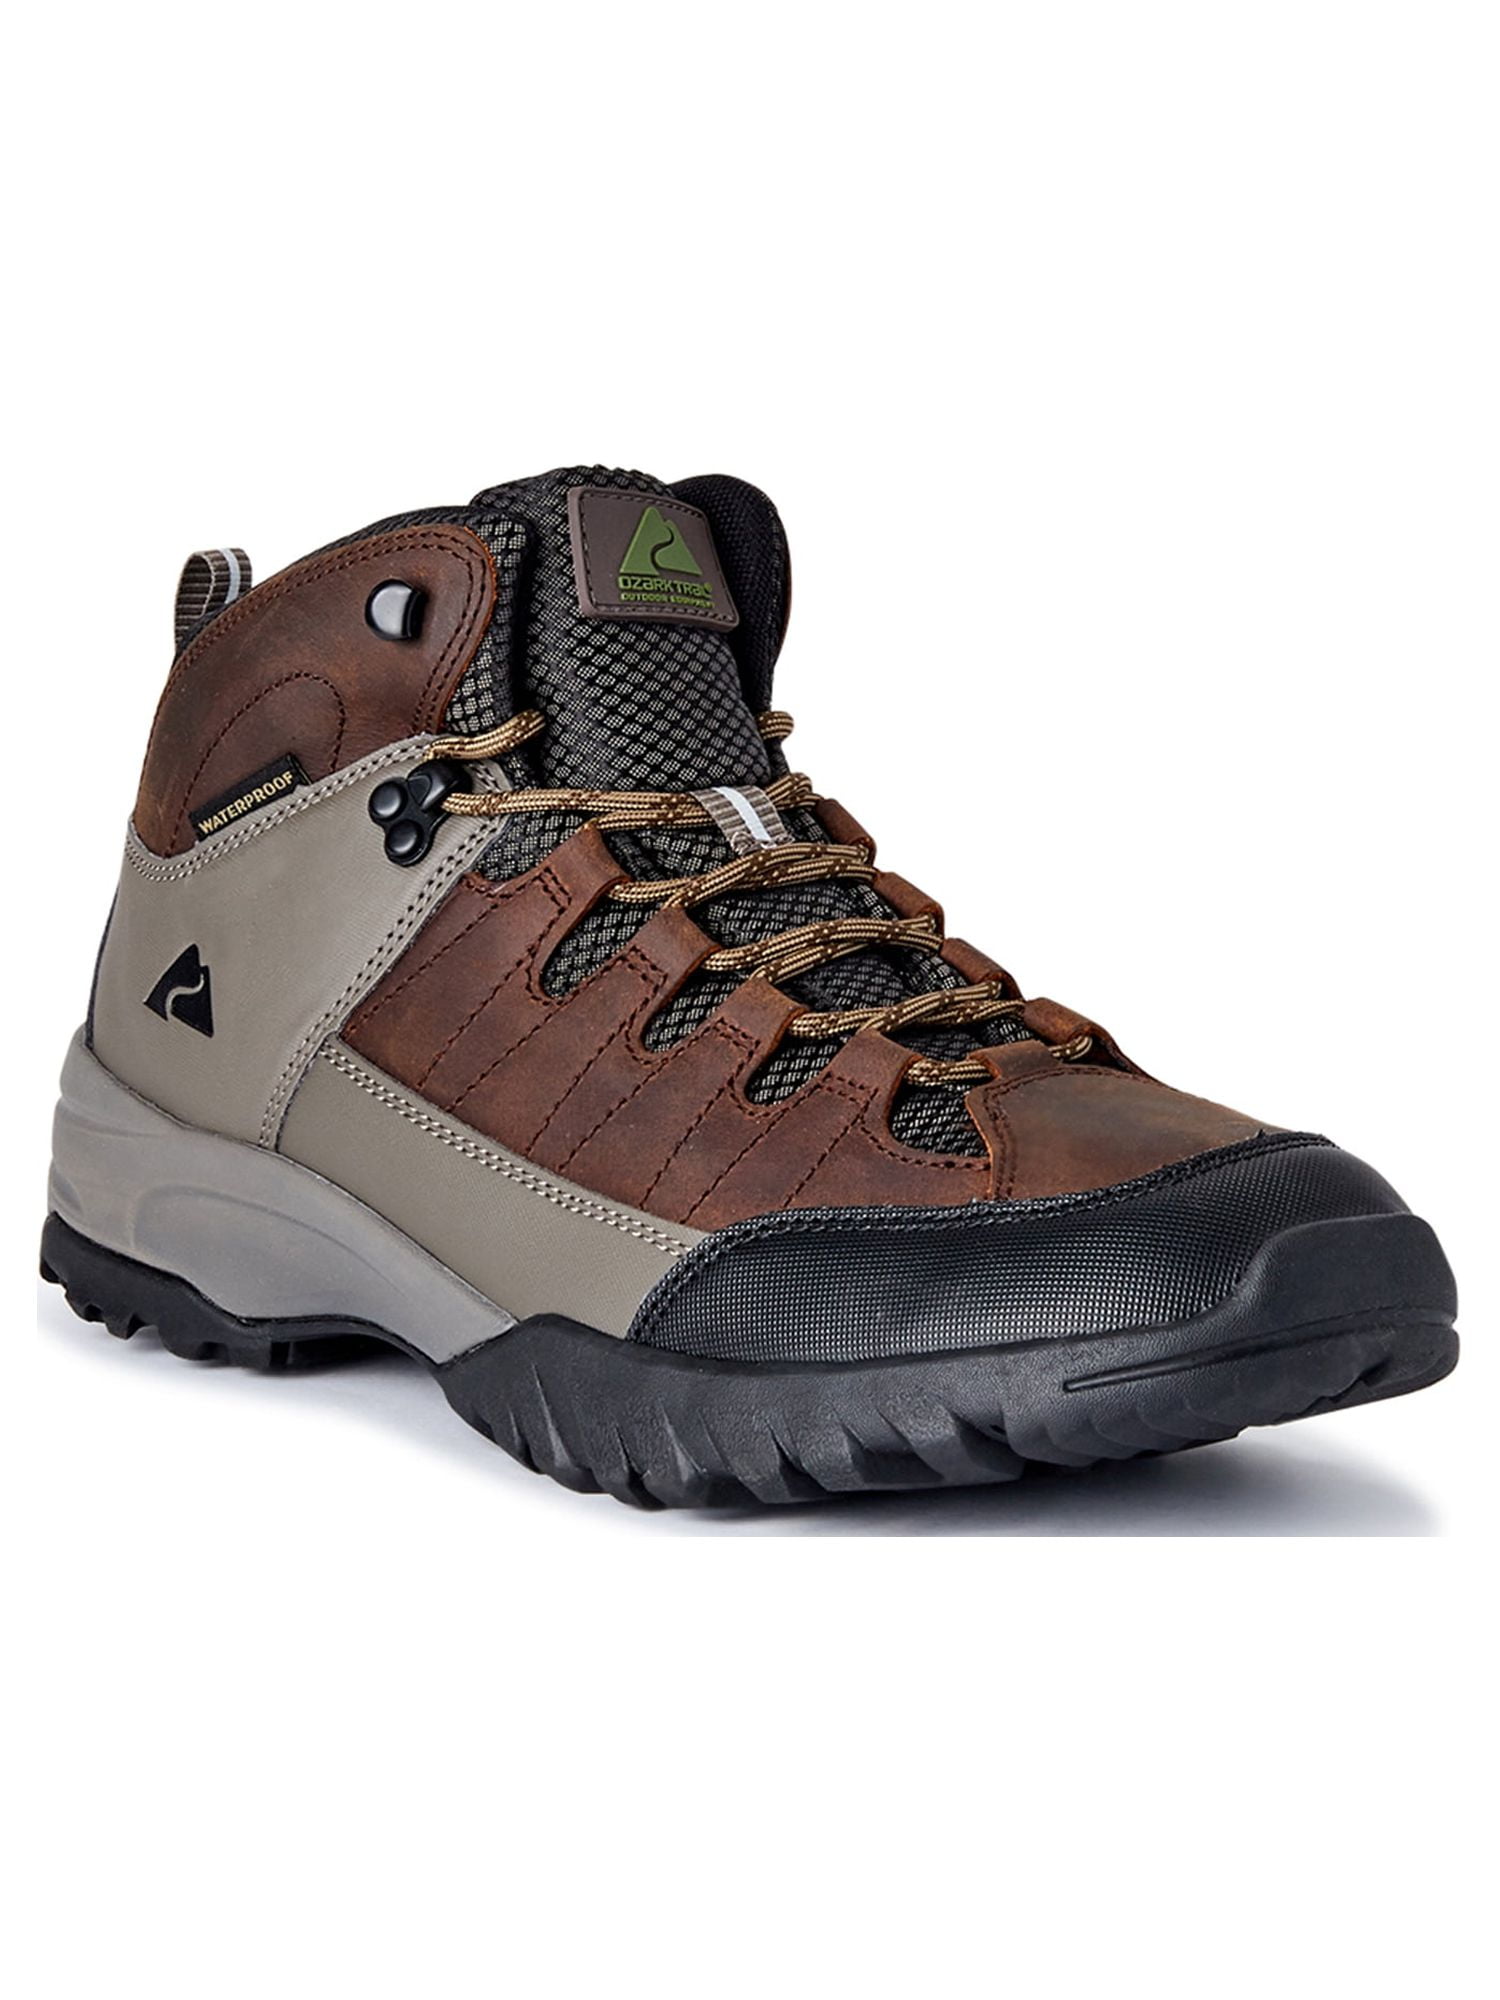 Men's Outdoor Hiking Boots  Waterproof Trail Shoes for Men –